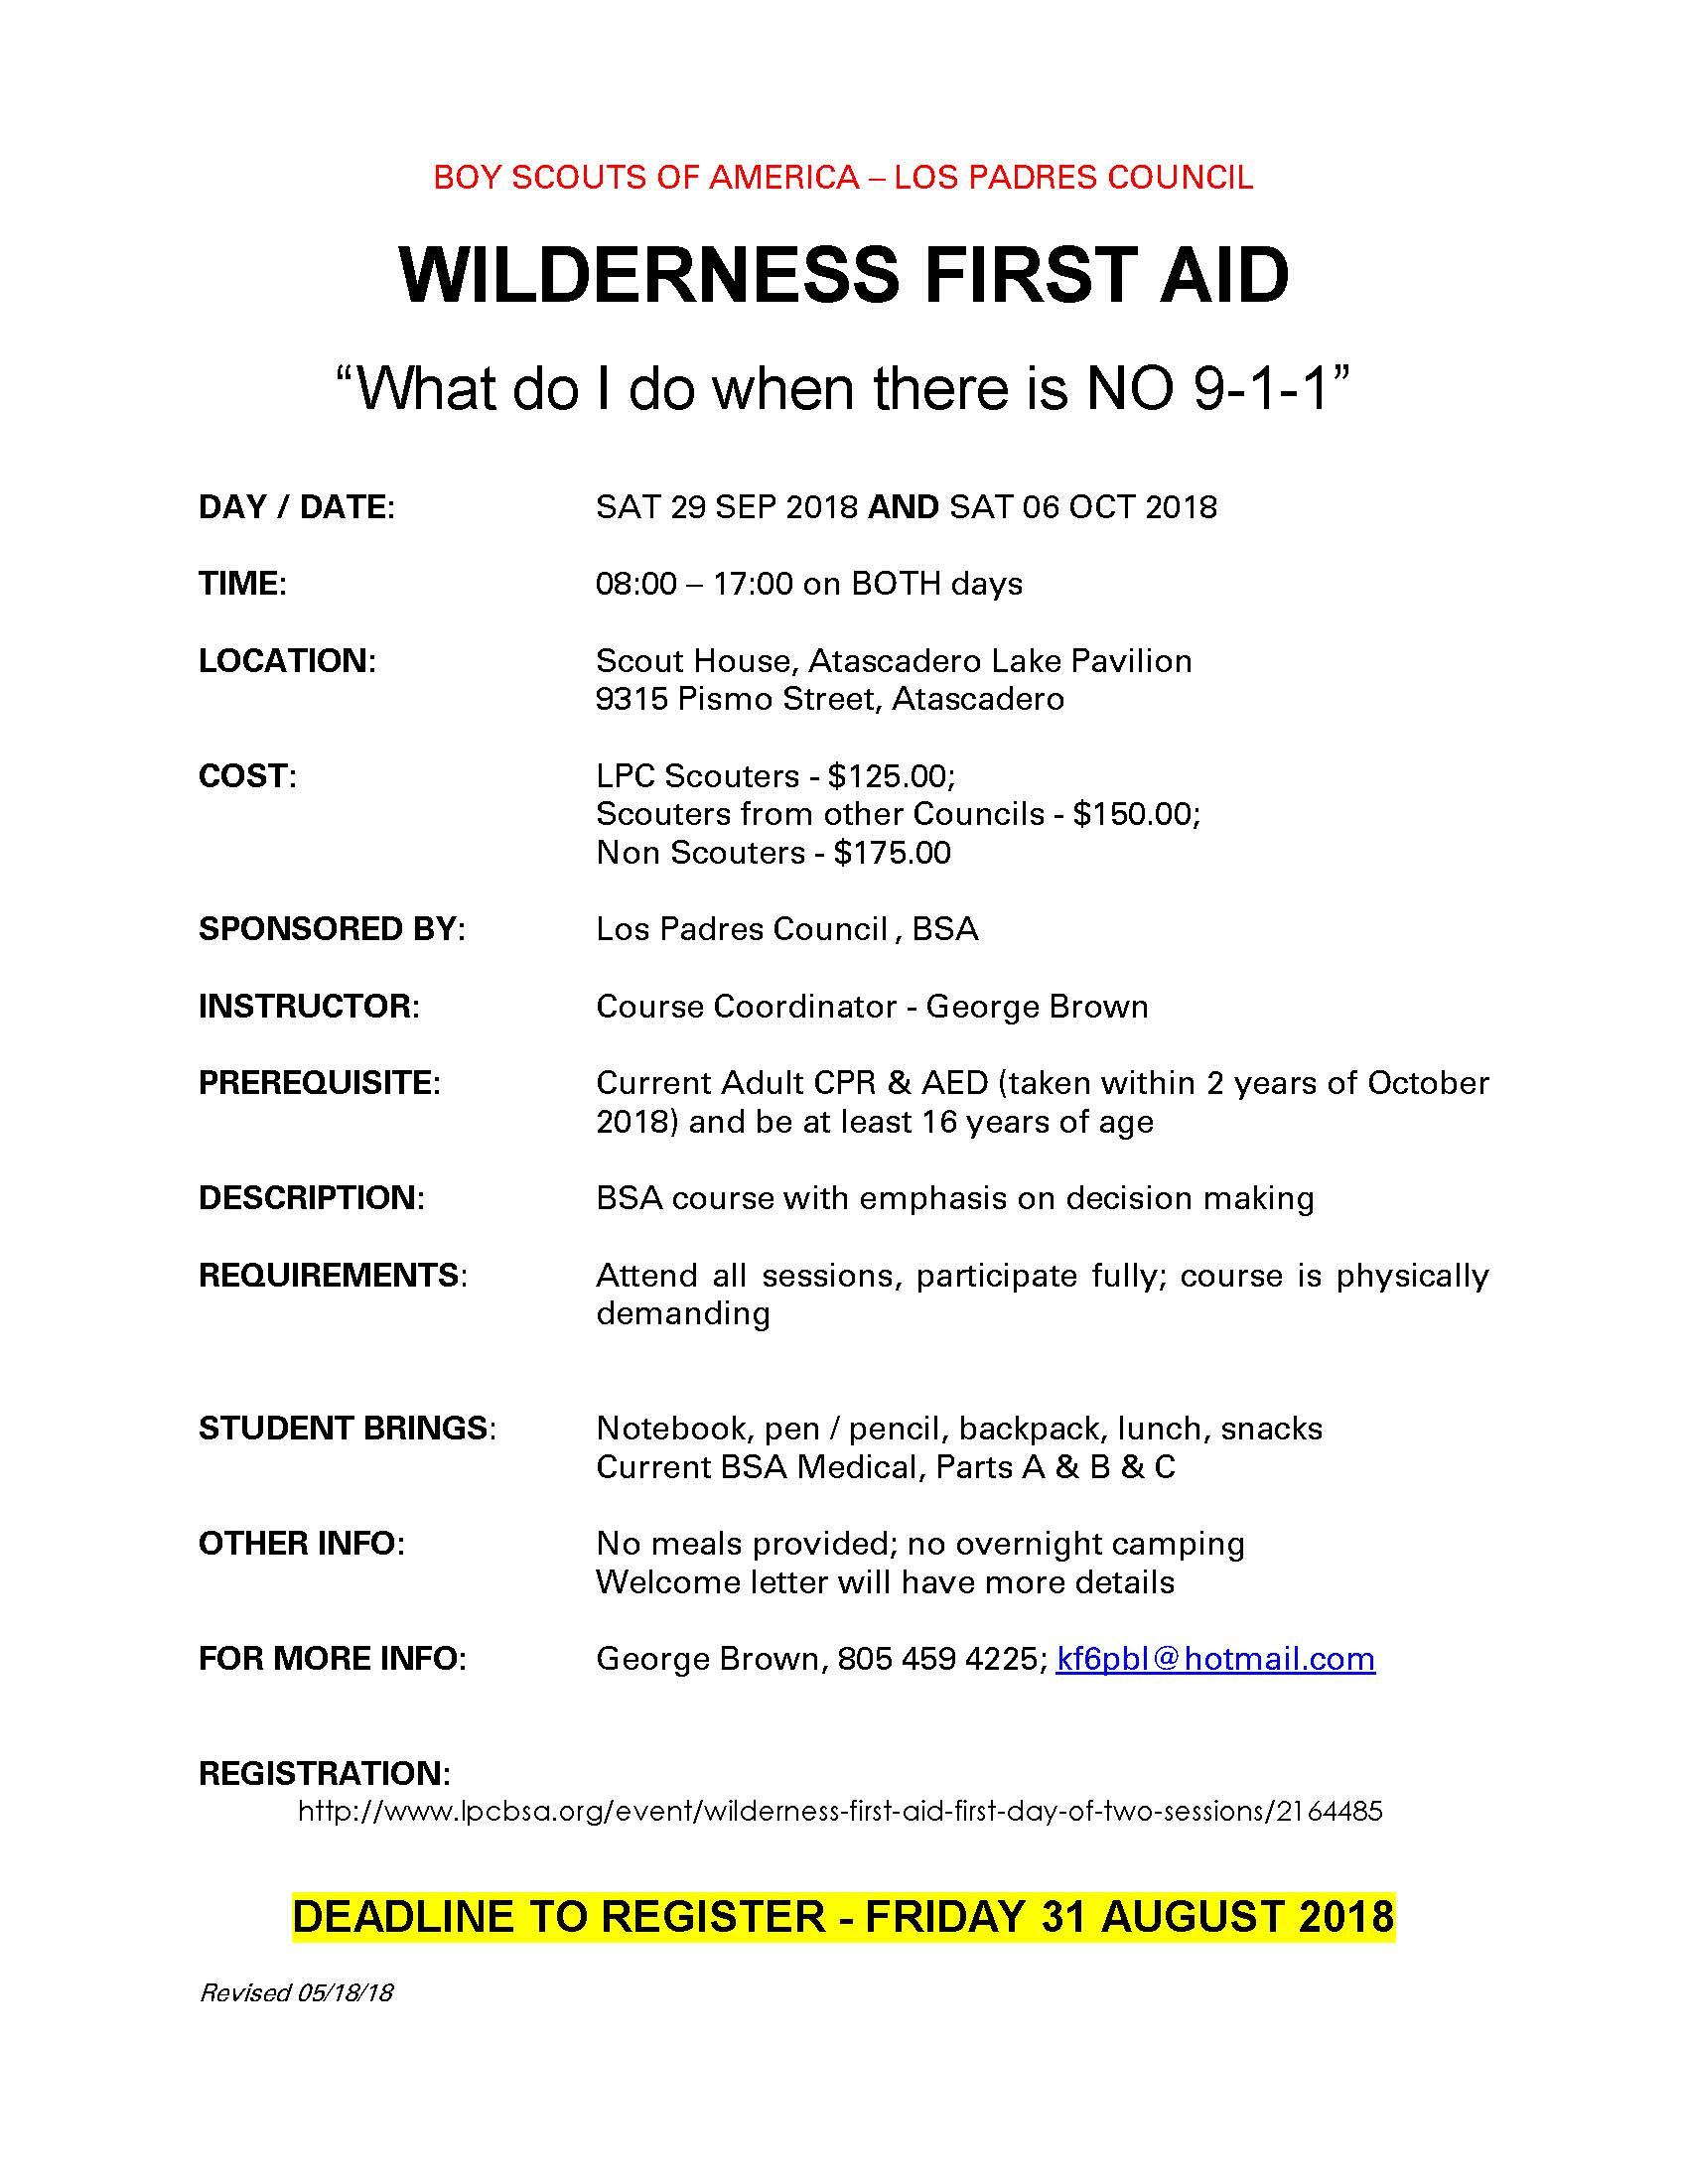 Wilderness First Aid - Fall 2018